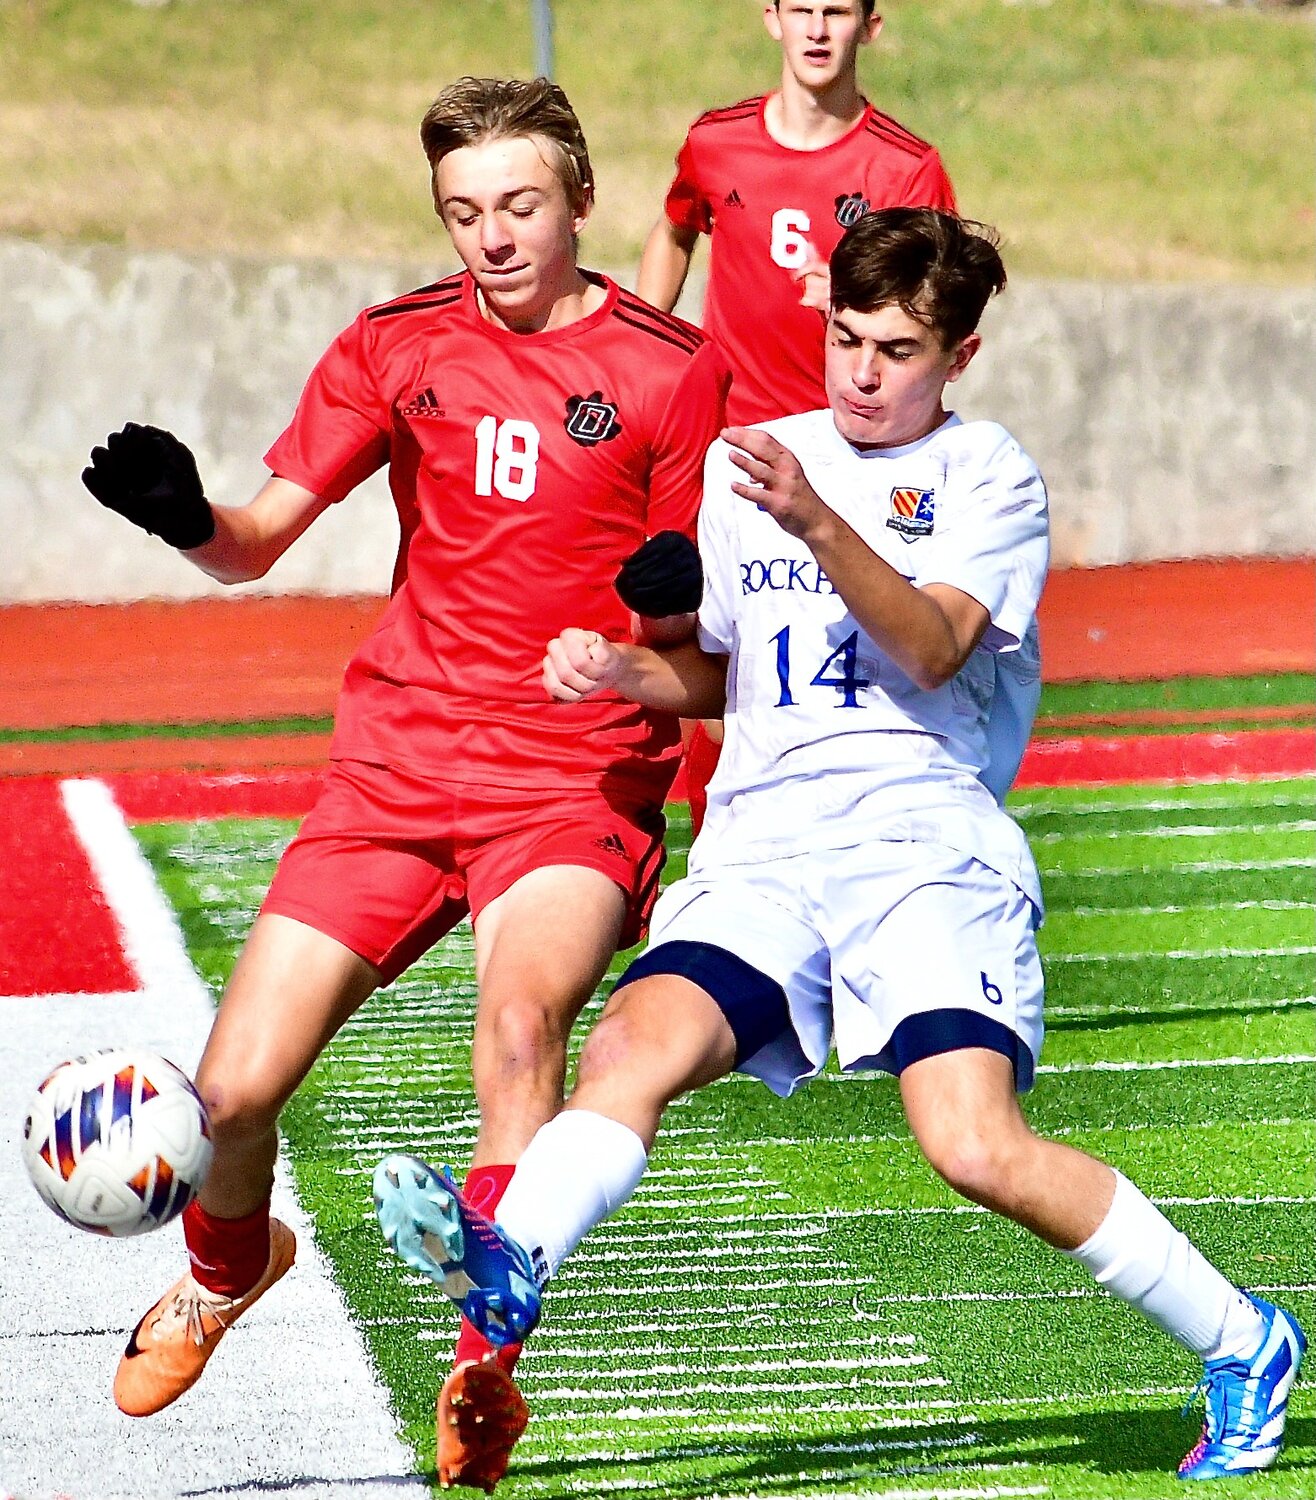 OZARK'S ZACH ULRICH and a Rockhurst player battle for control of the ball.